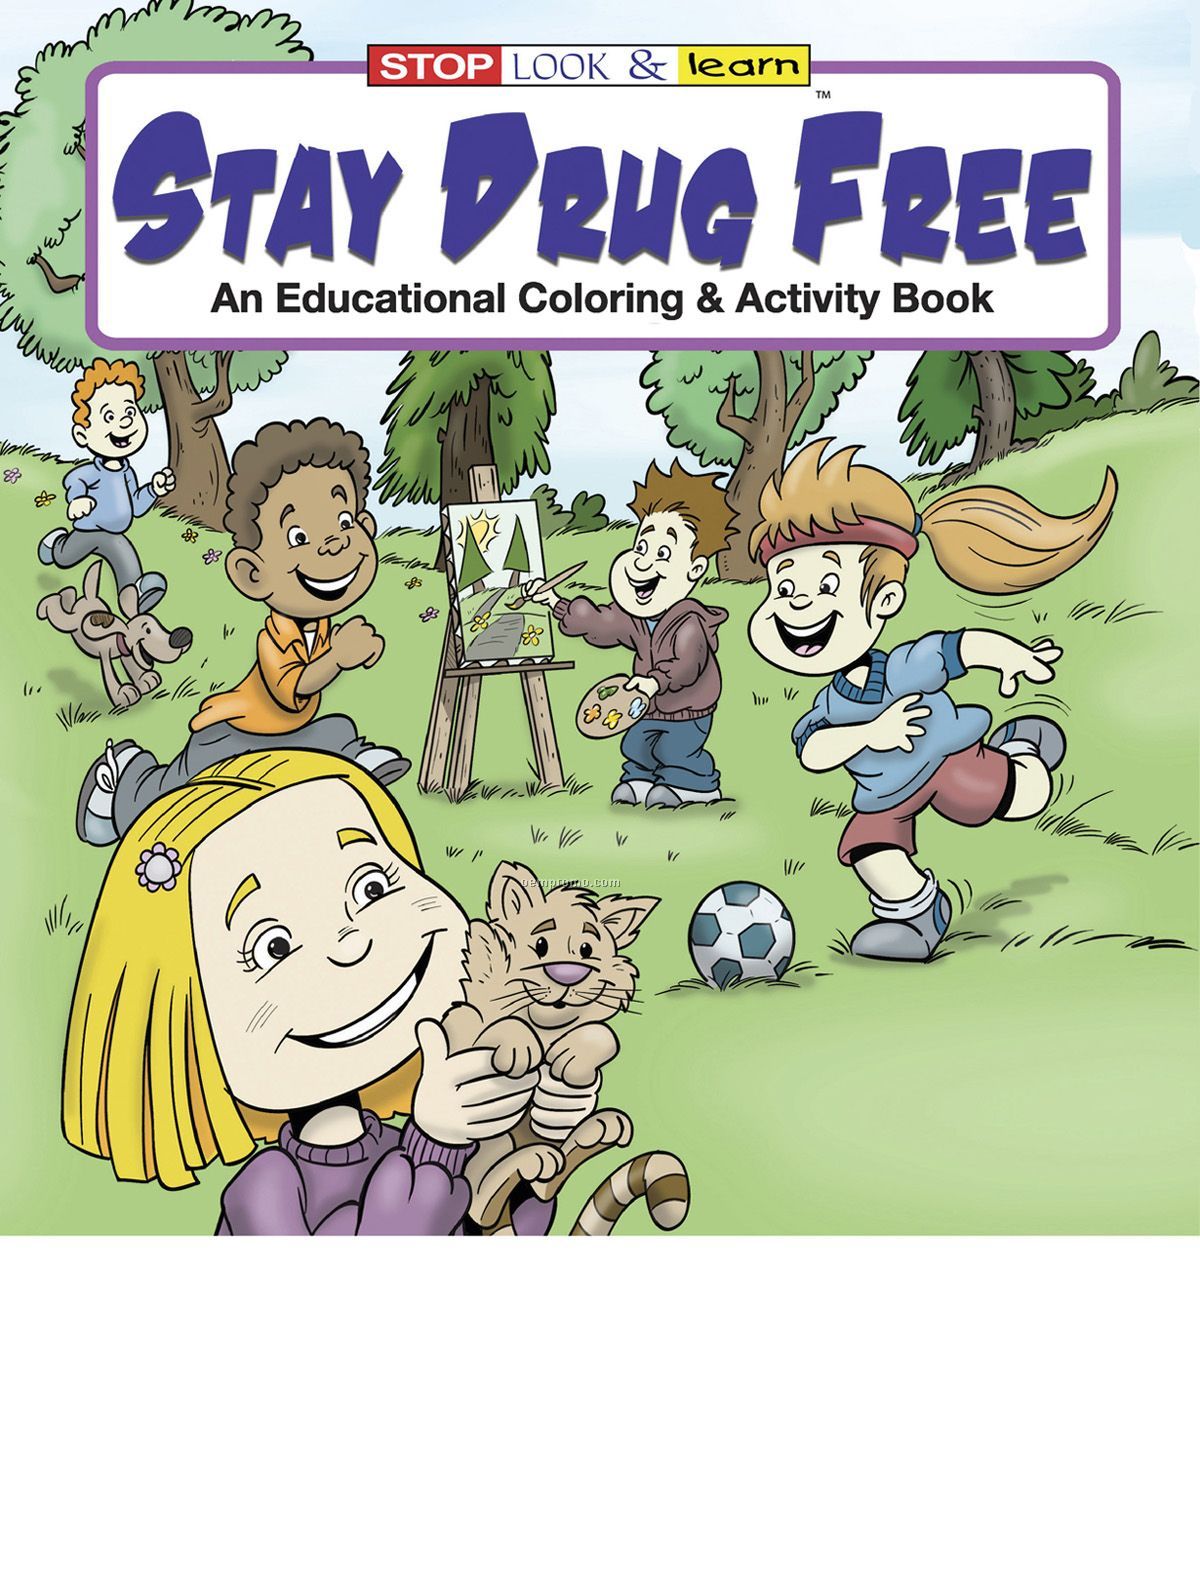 Stay Drug Free Coloring Book